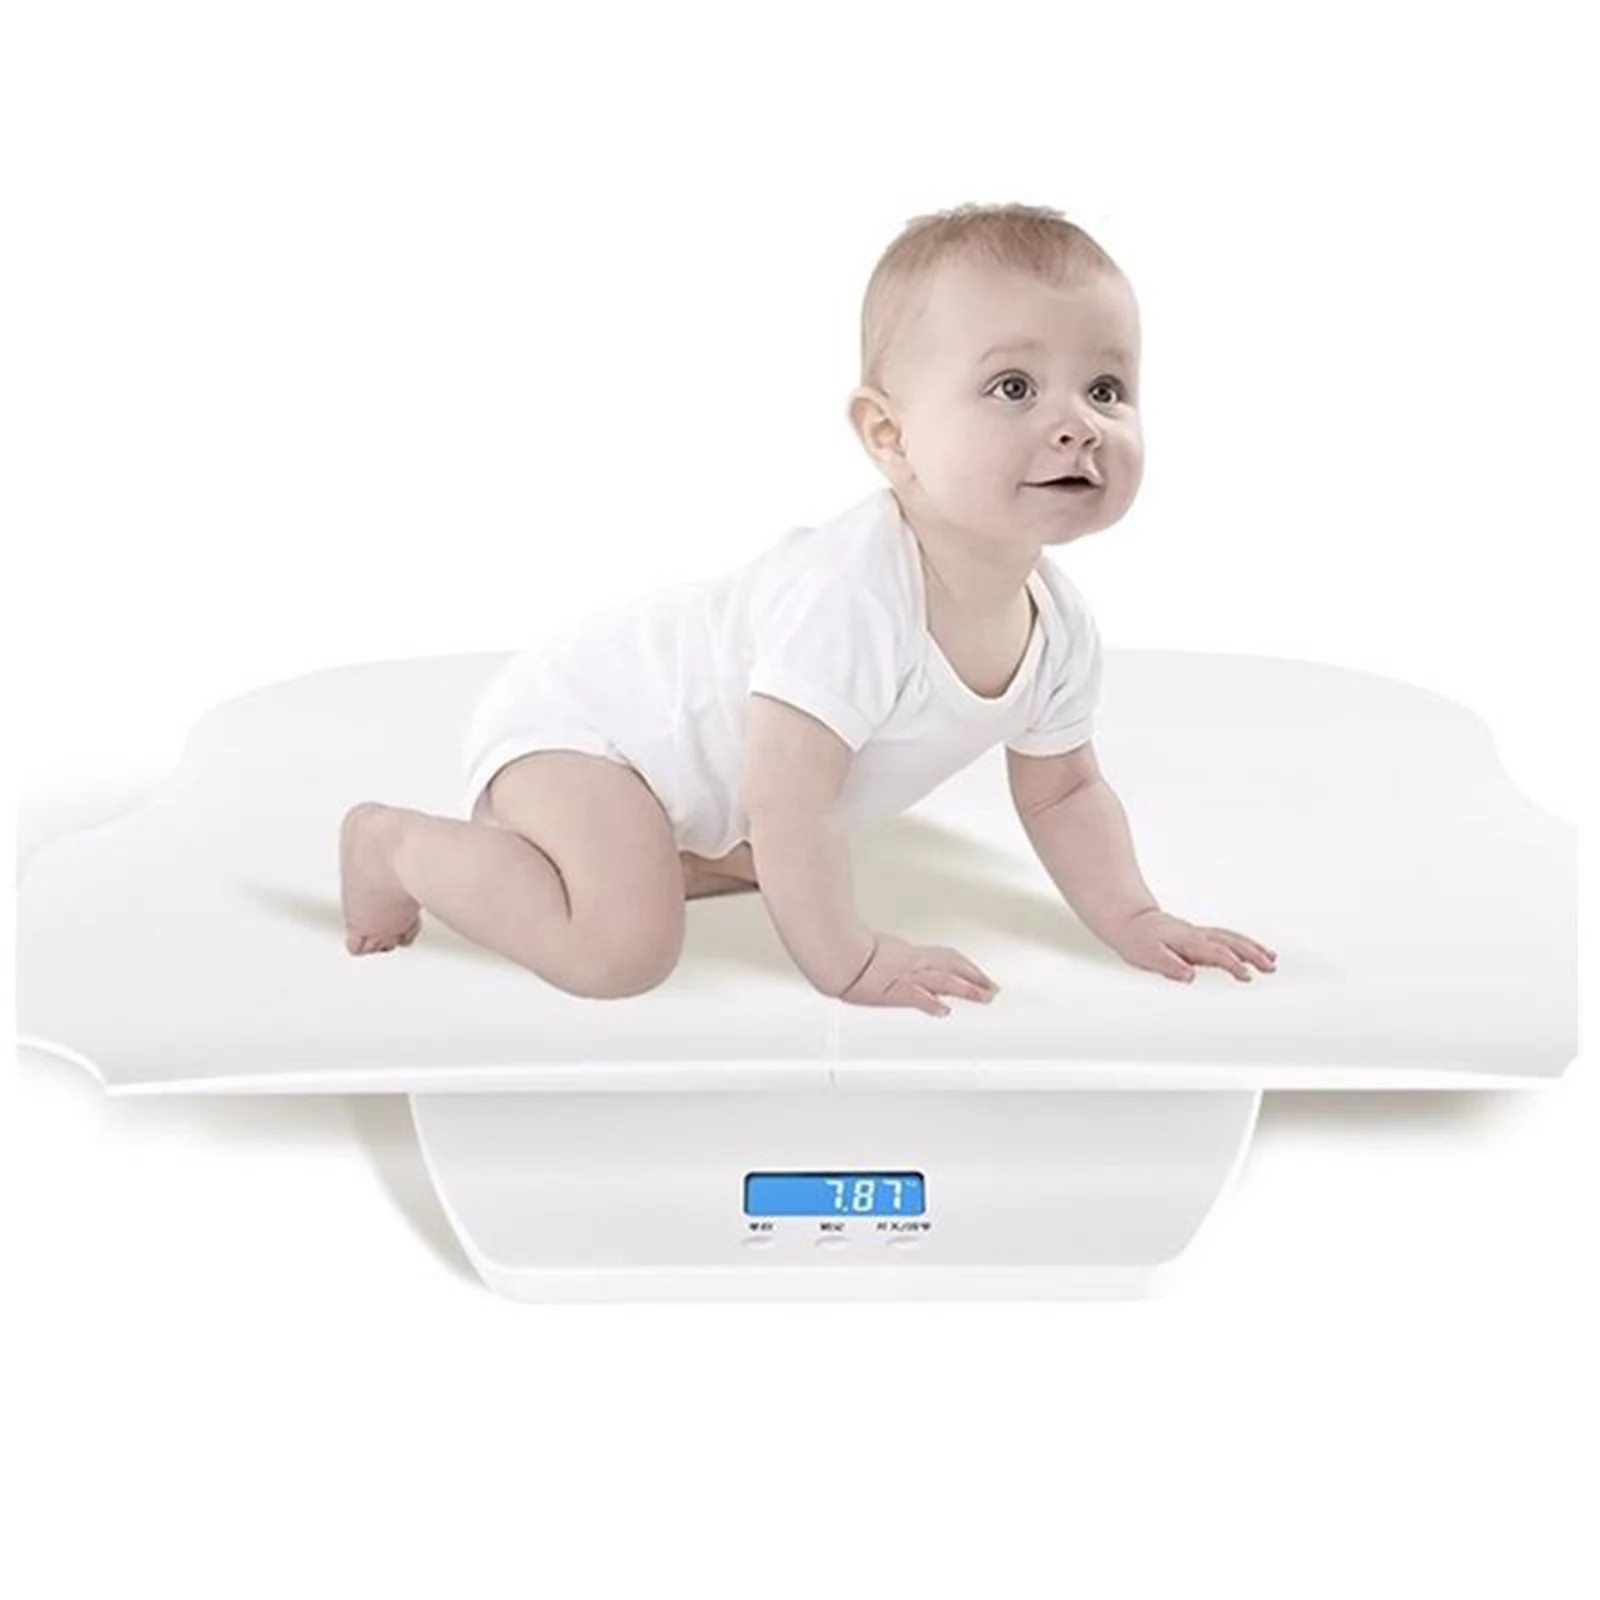 Multi-Function Accurate Baby Scale Kittens Infant Scale LCD Display White